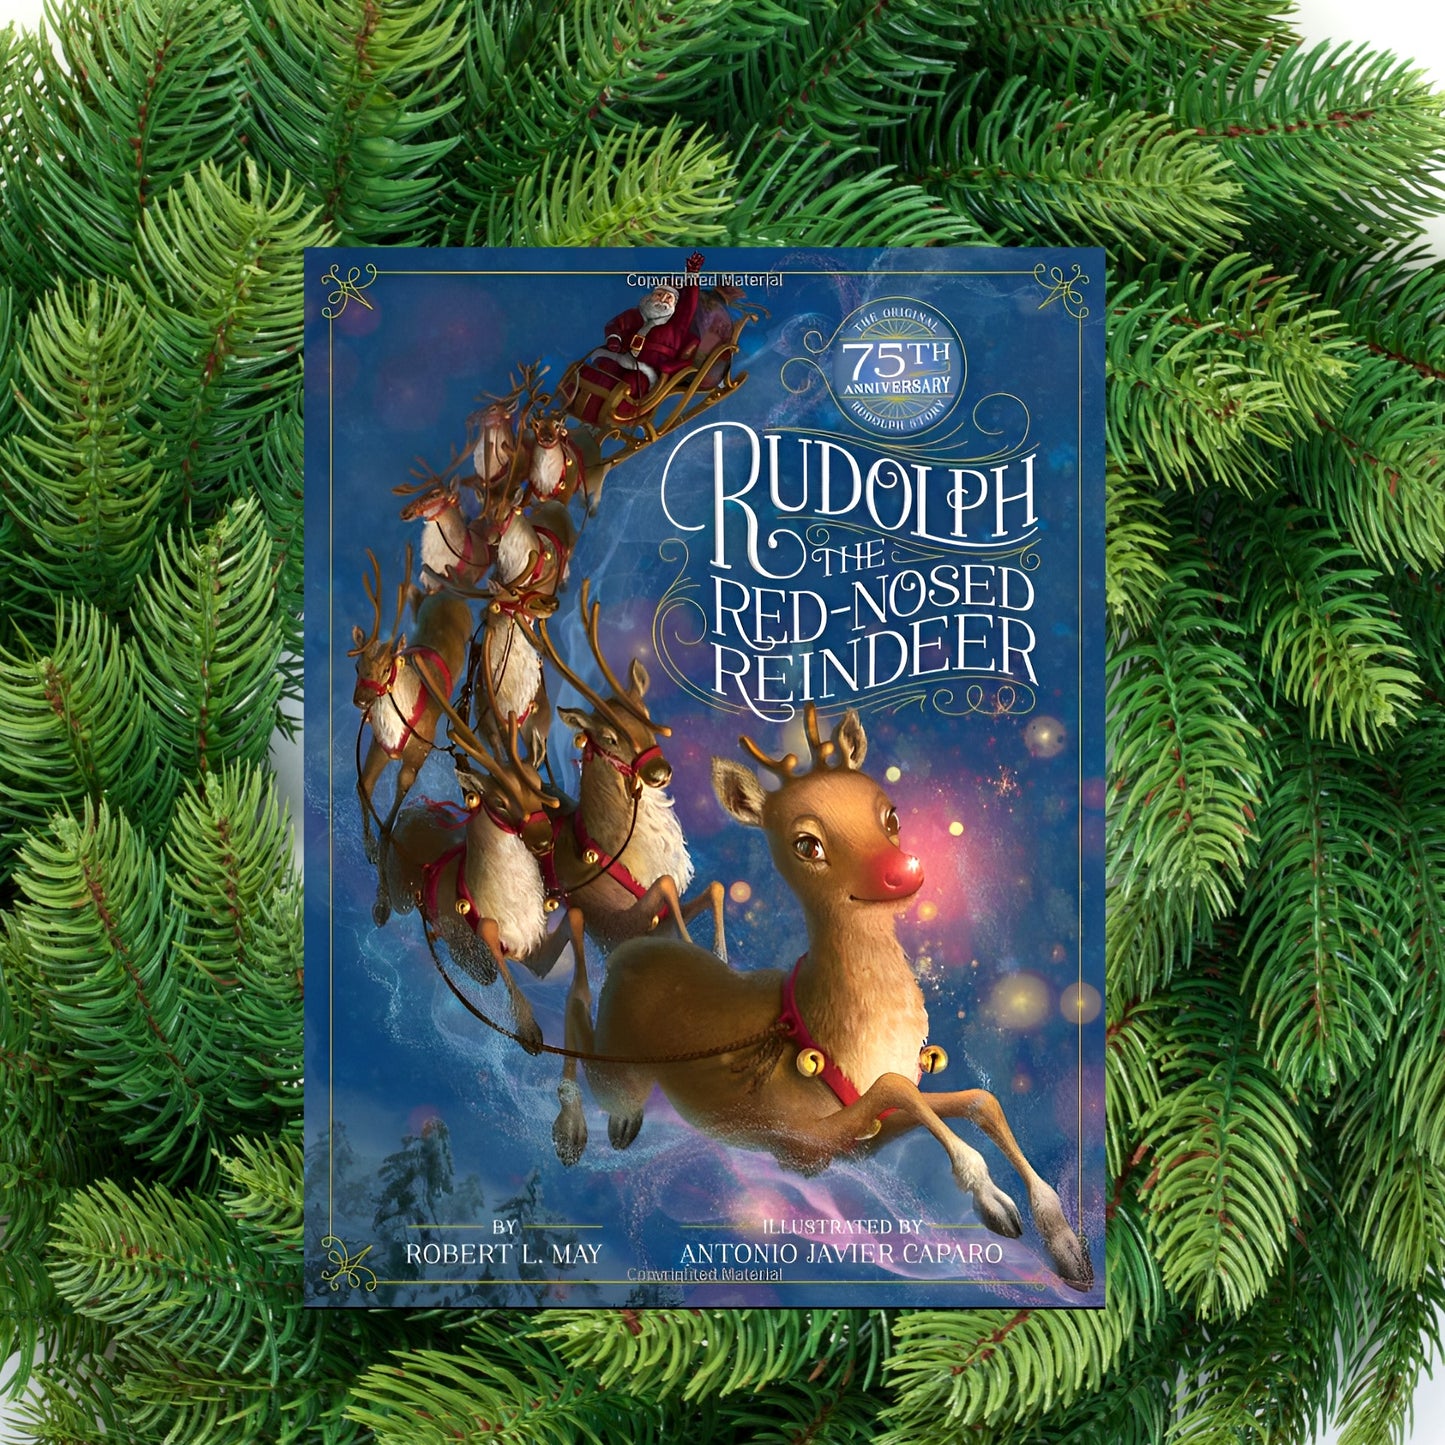 Ivy Kids Holiday Fun Kit Rudolph the Red-Nosed Reindeer